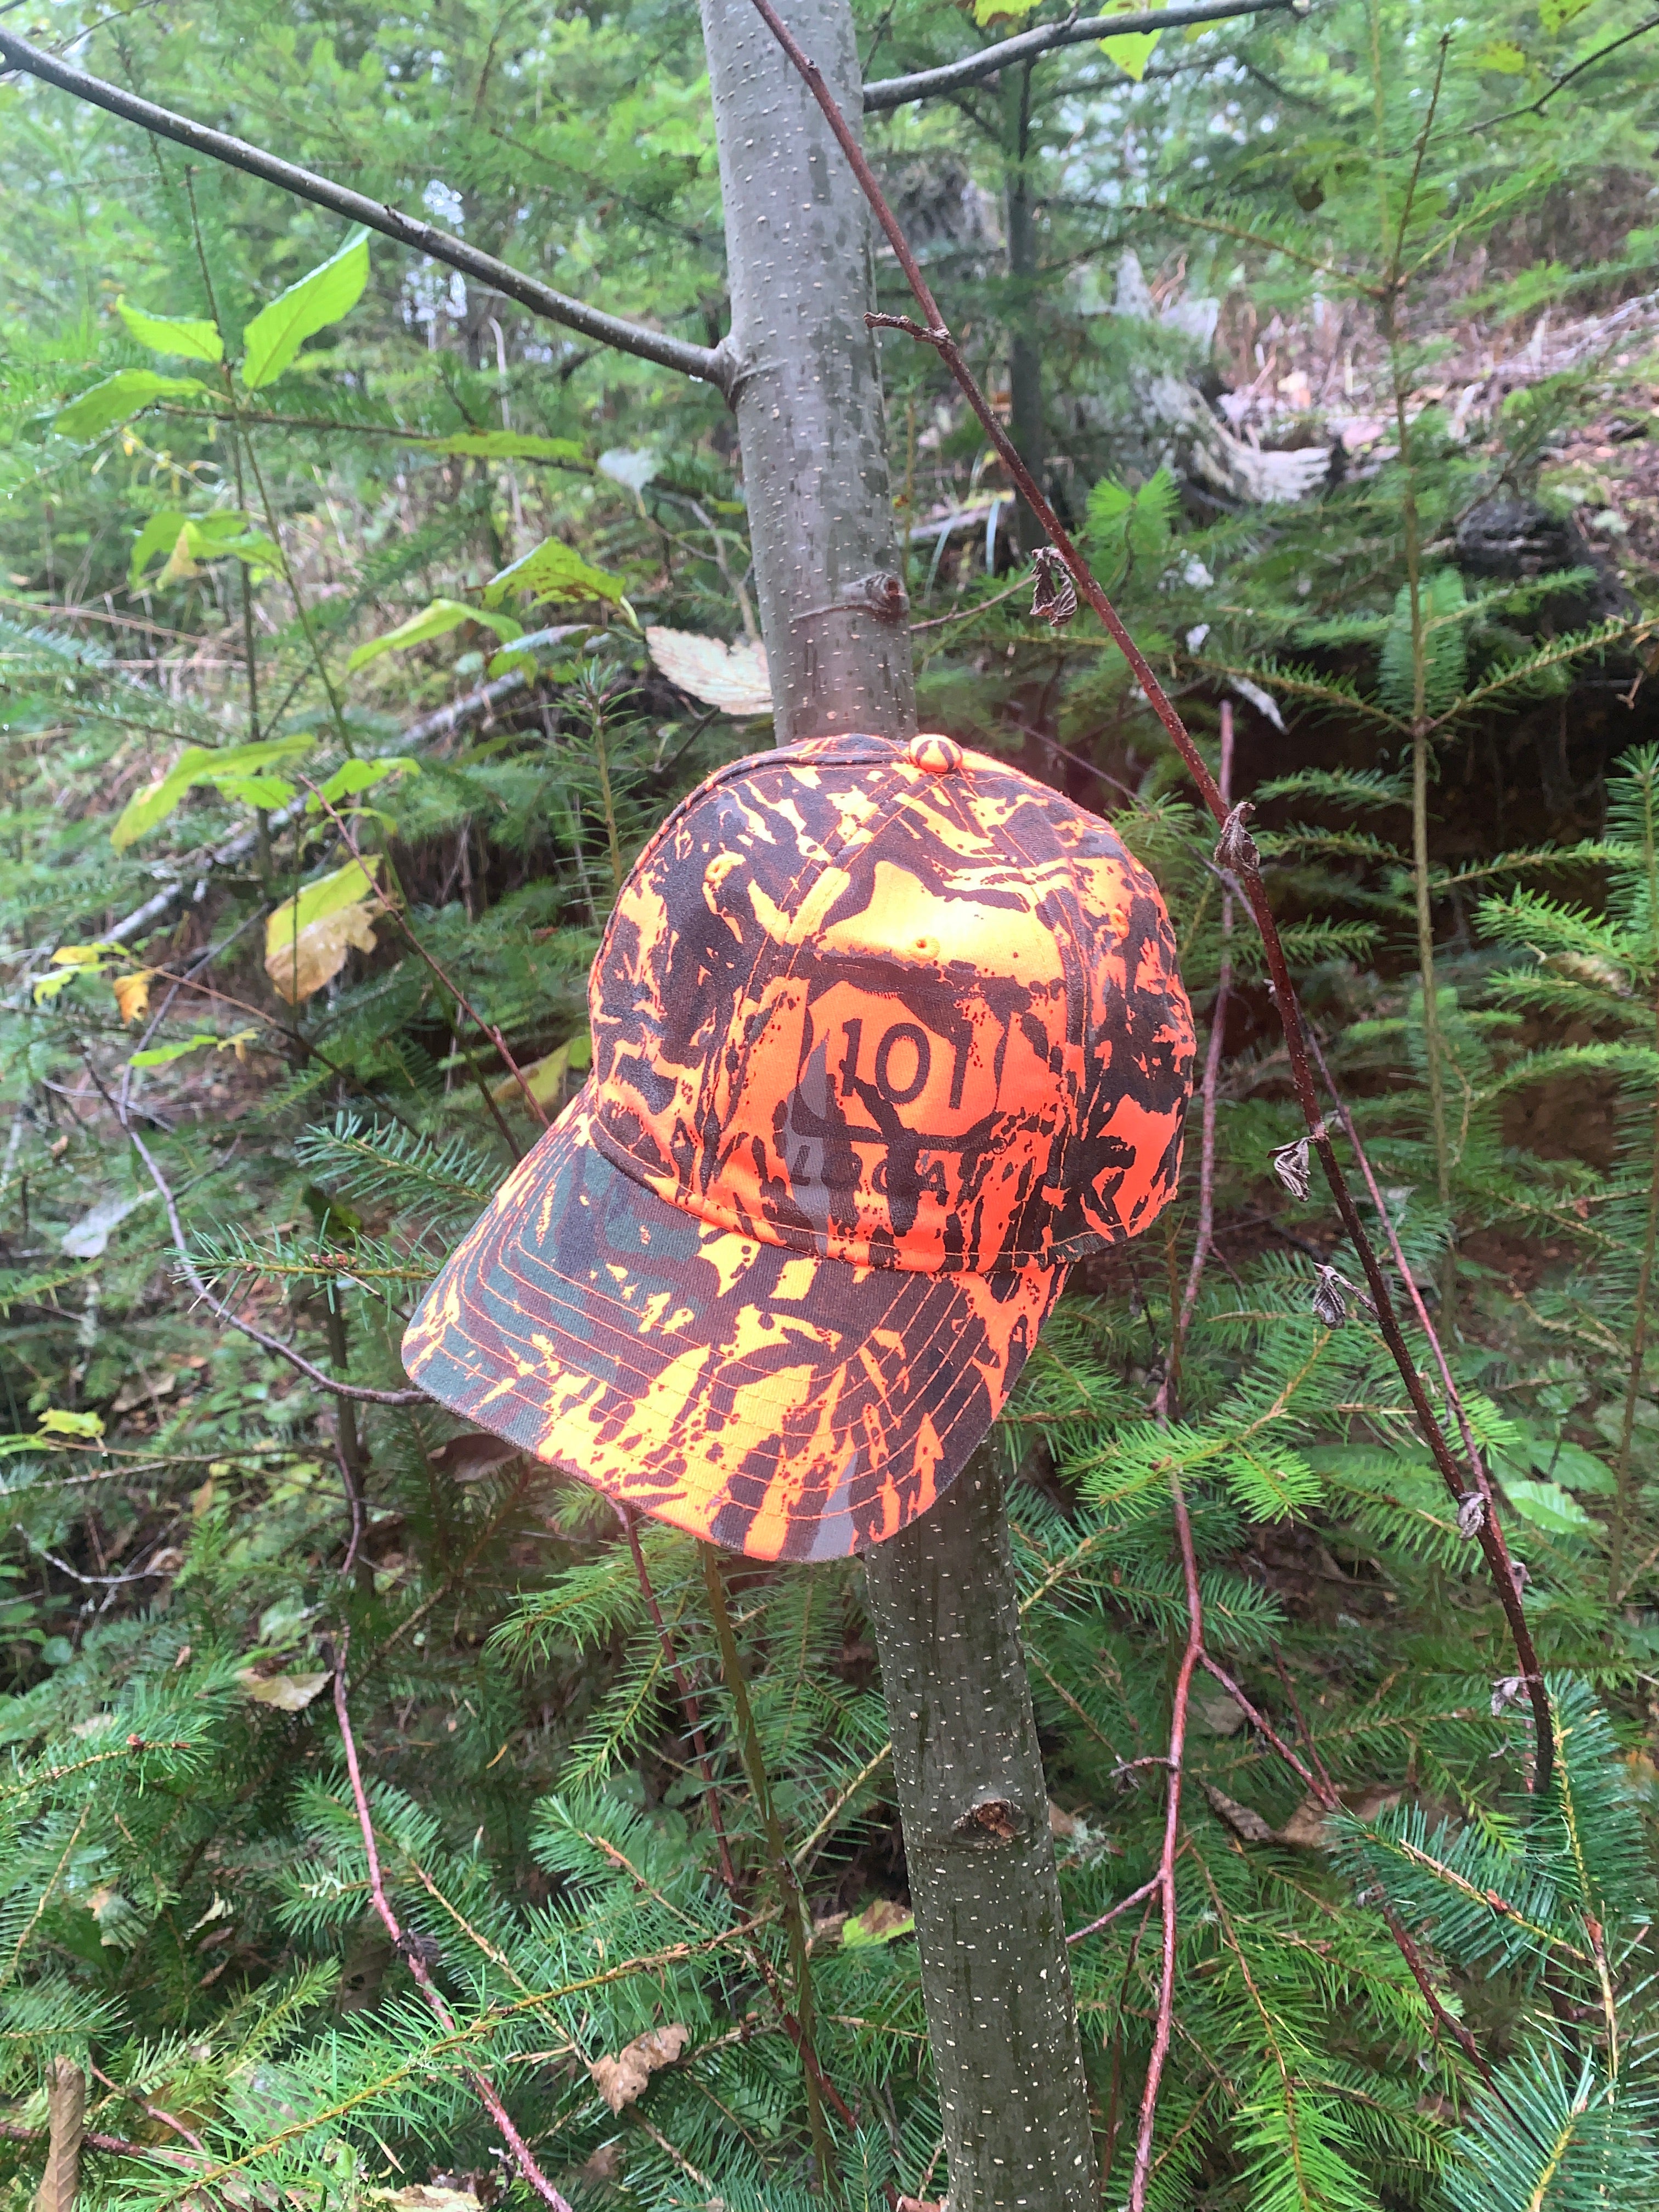 101 Local - Woods over Waves Hat